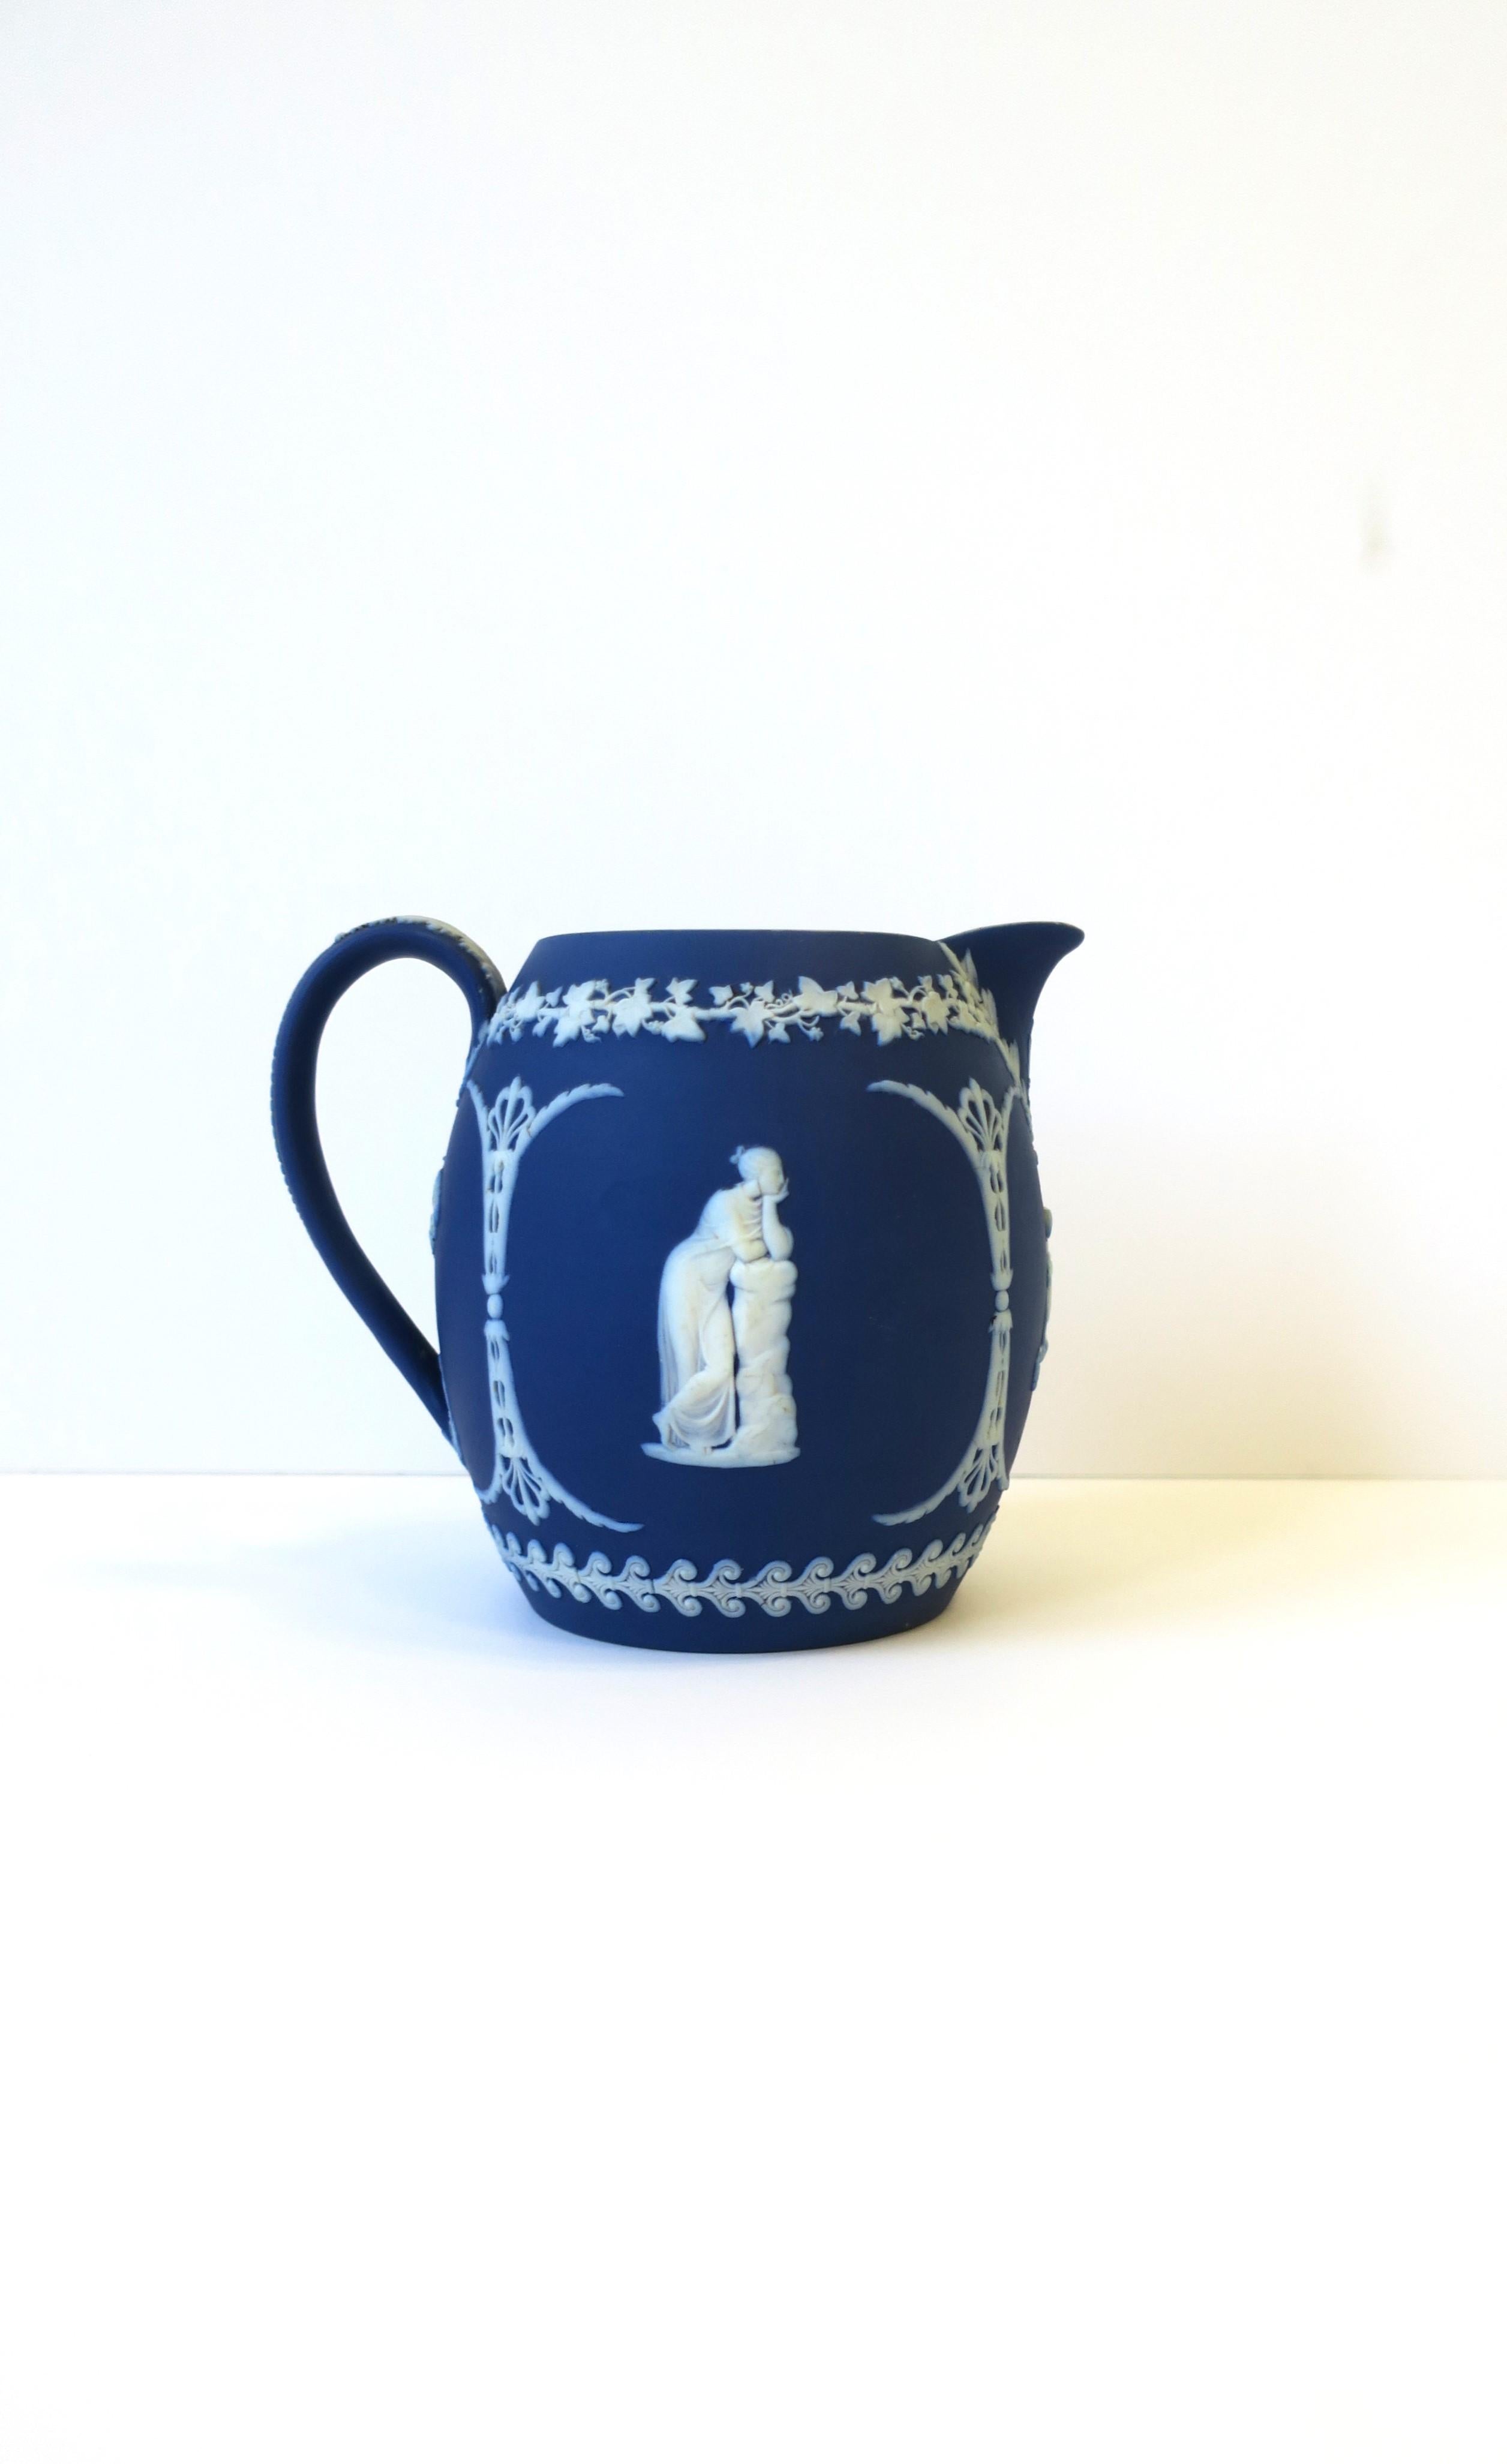 A beautiful antique English Wedgwood Jasperware blue and white pitcher, in the Neoclassical style, circa late 19th century, England. A beautiful matte unglazed stoneware pitcher or vase with a white raised relief; center area on two sides has